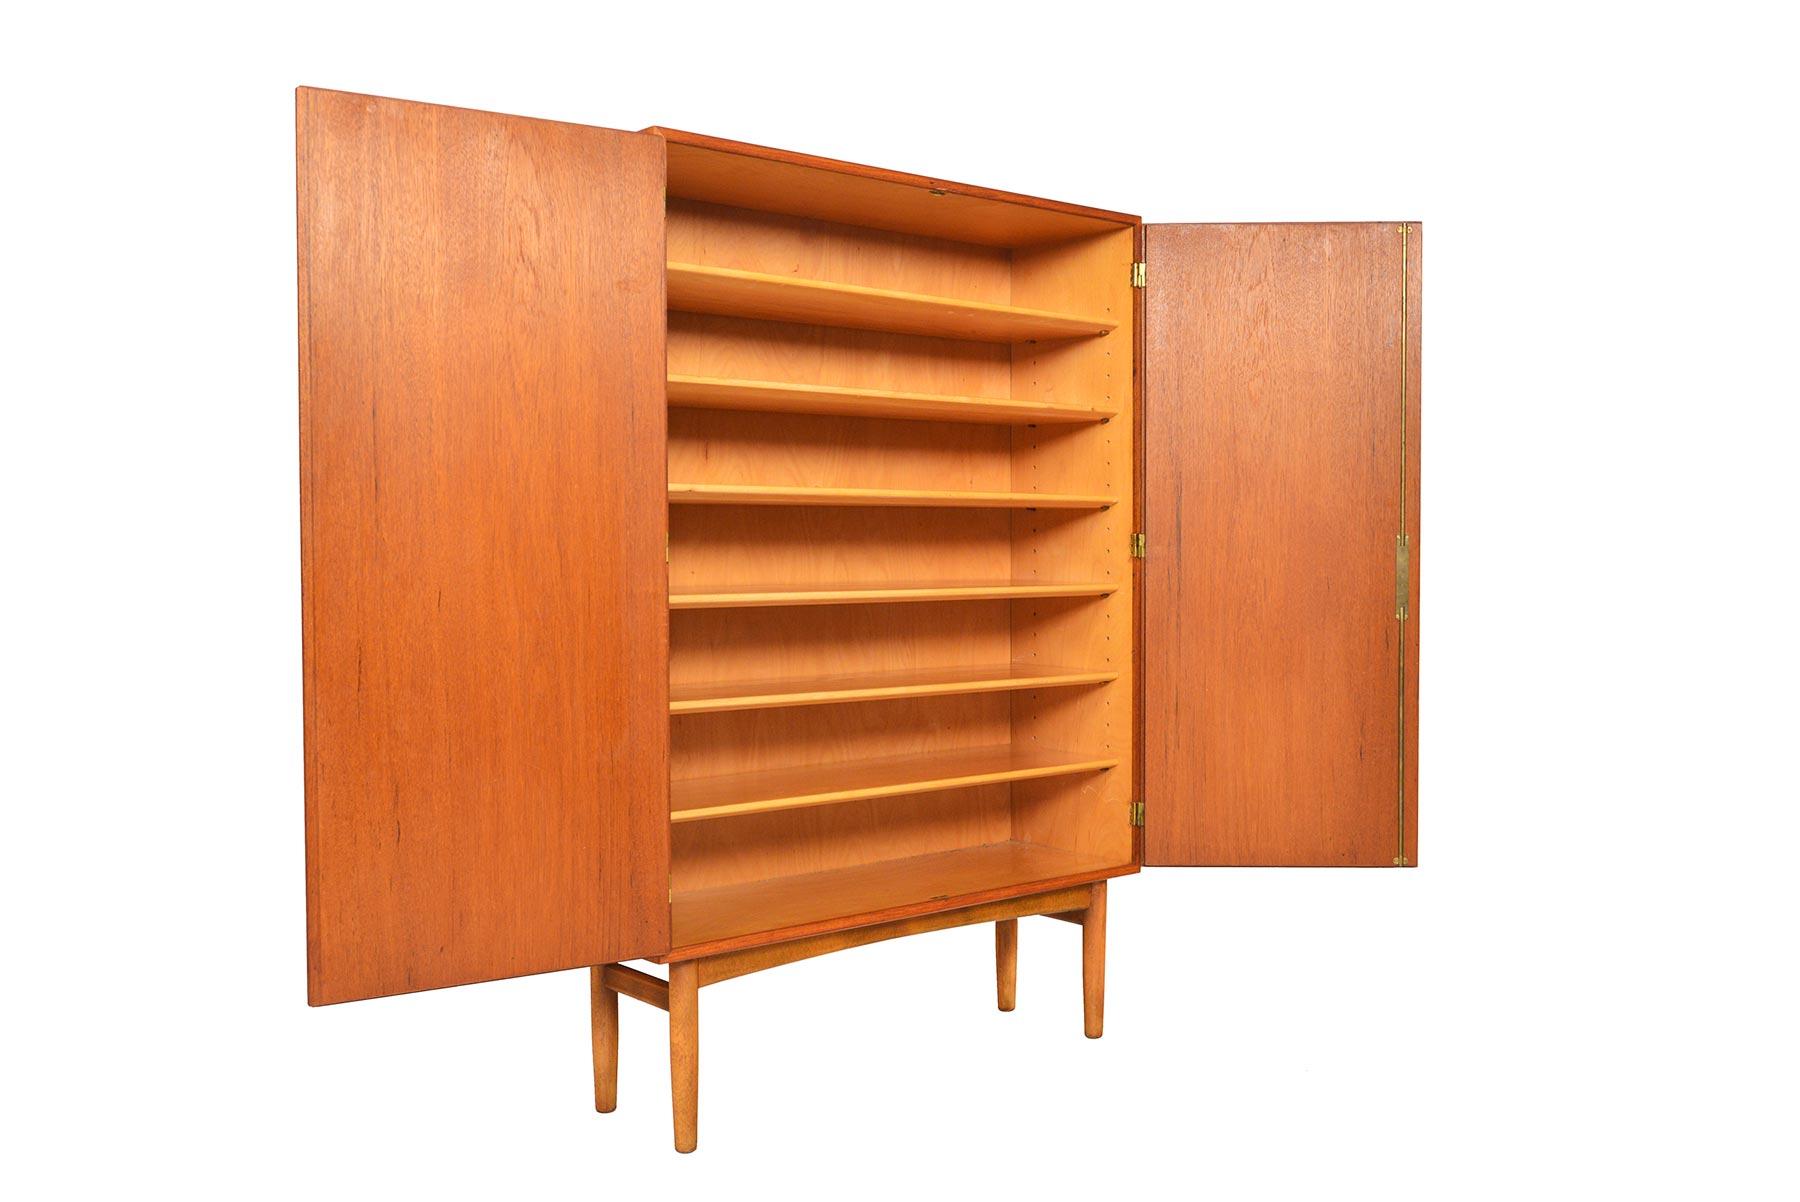 This narrow, tall cupboard was designed by Børge Mogensen for Søborg Møbelfabrik in the 1950s. Two large teak cabinet doors with the designer's signature pulls open to reveal a spacious birch lined interior with six adjustable shelves. Case stands